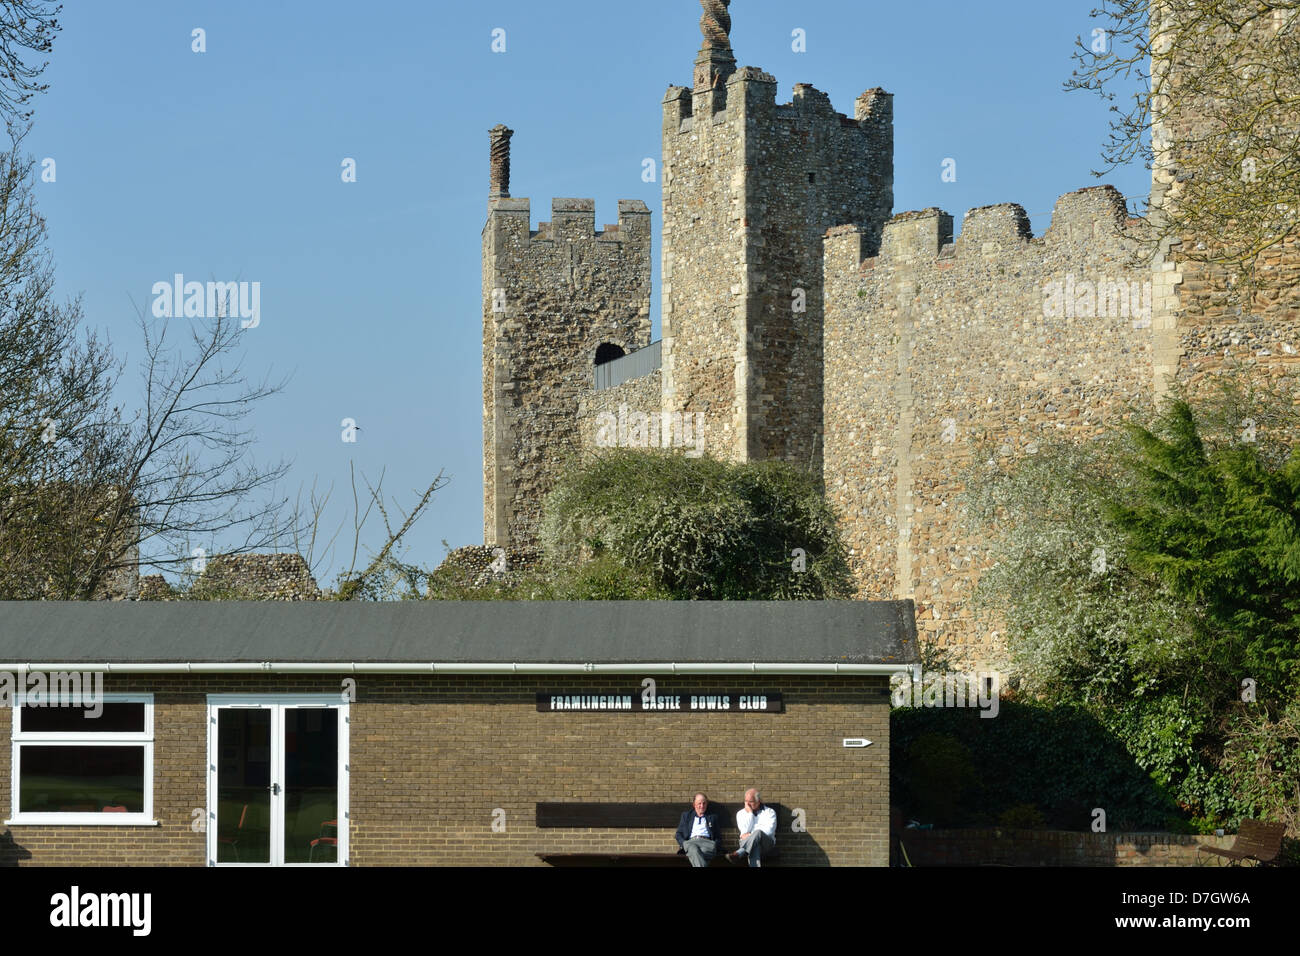 Framlingham castle Bowls Club with two men sitting Stock Photo